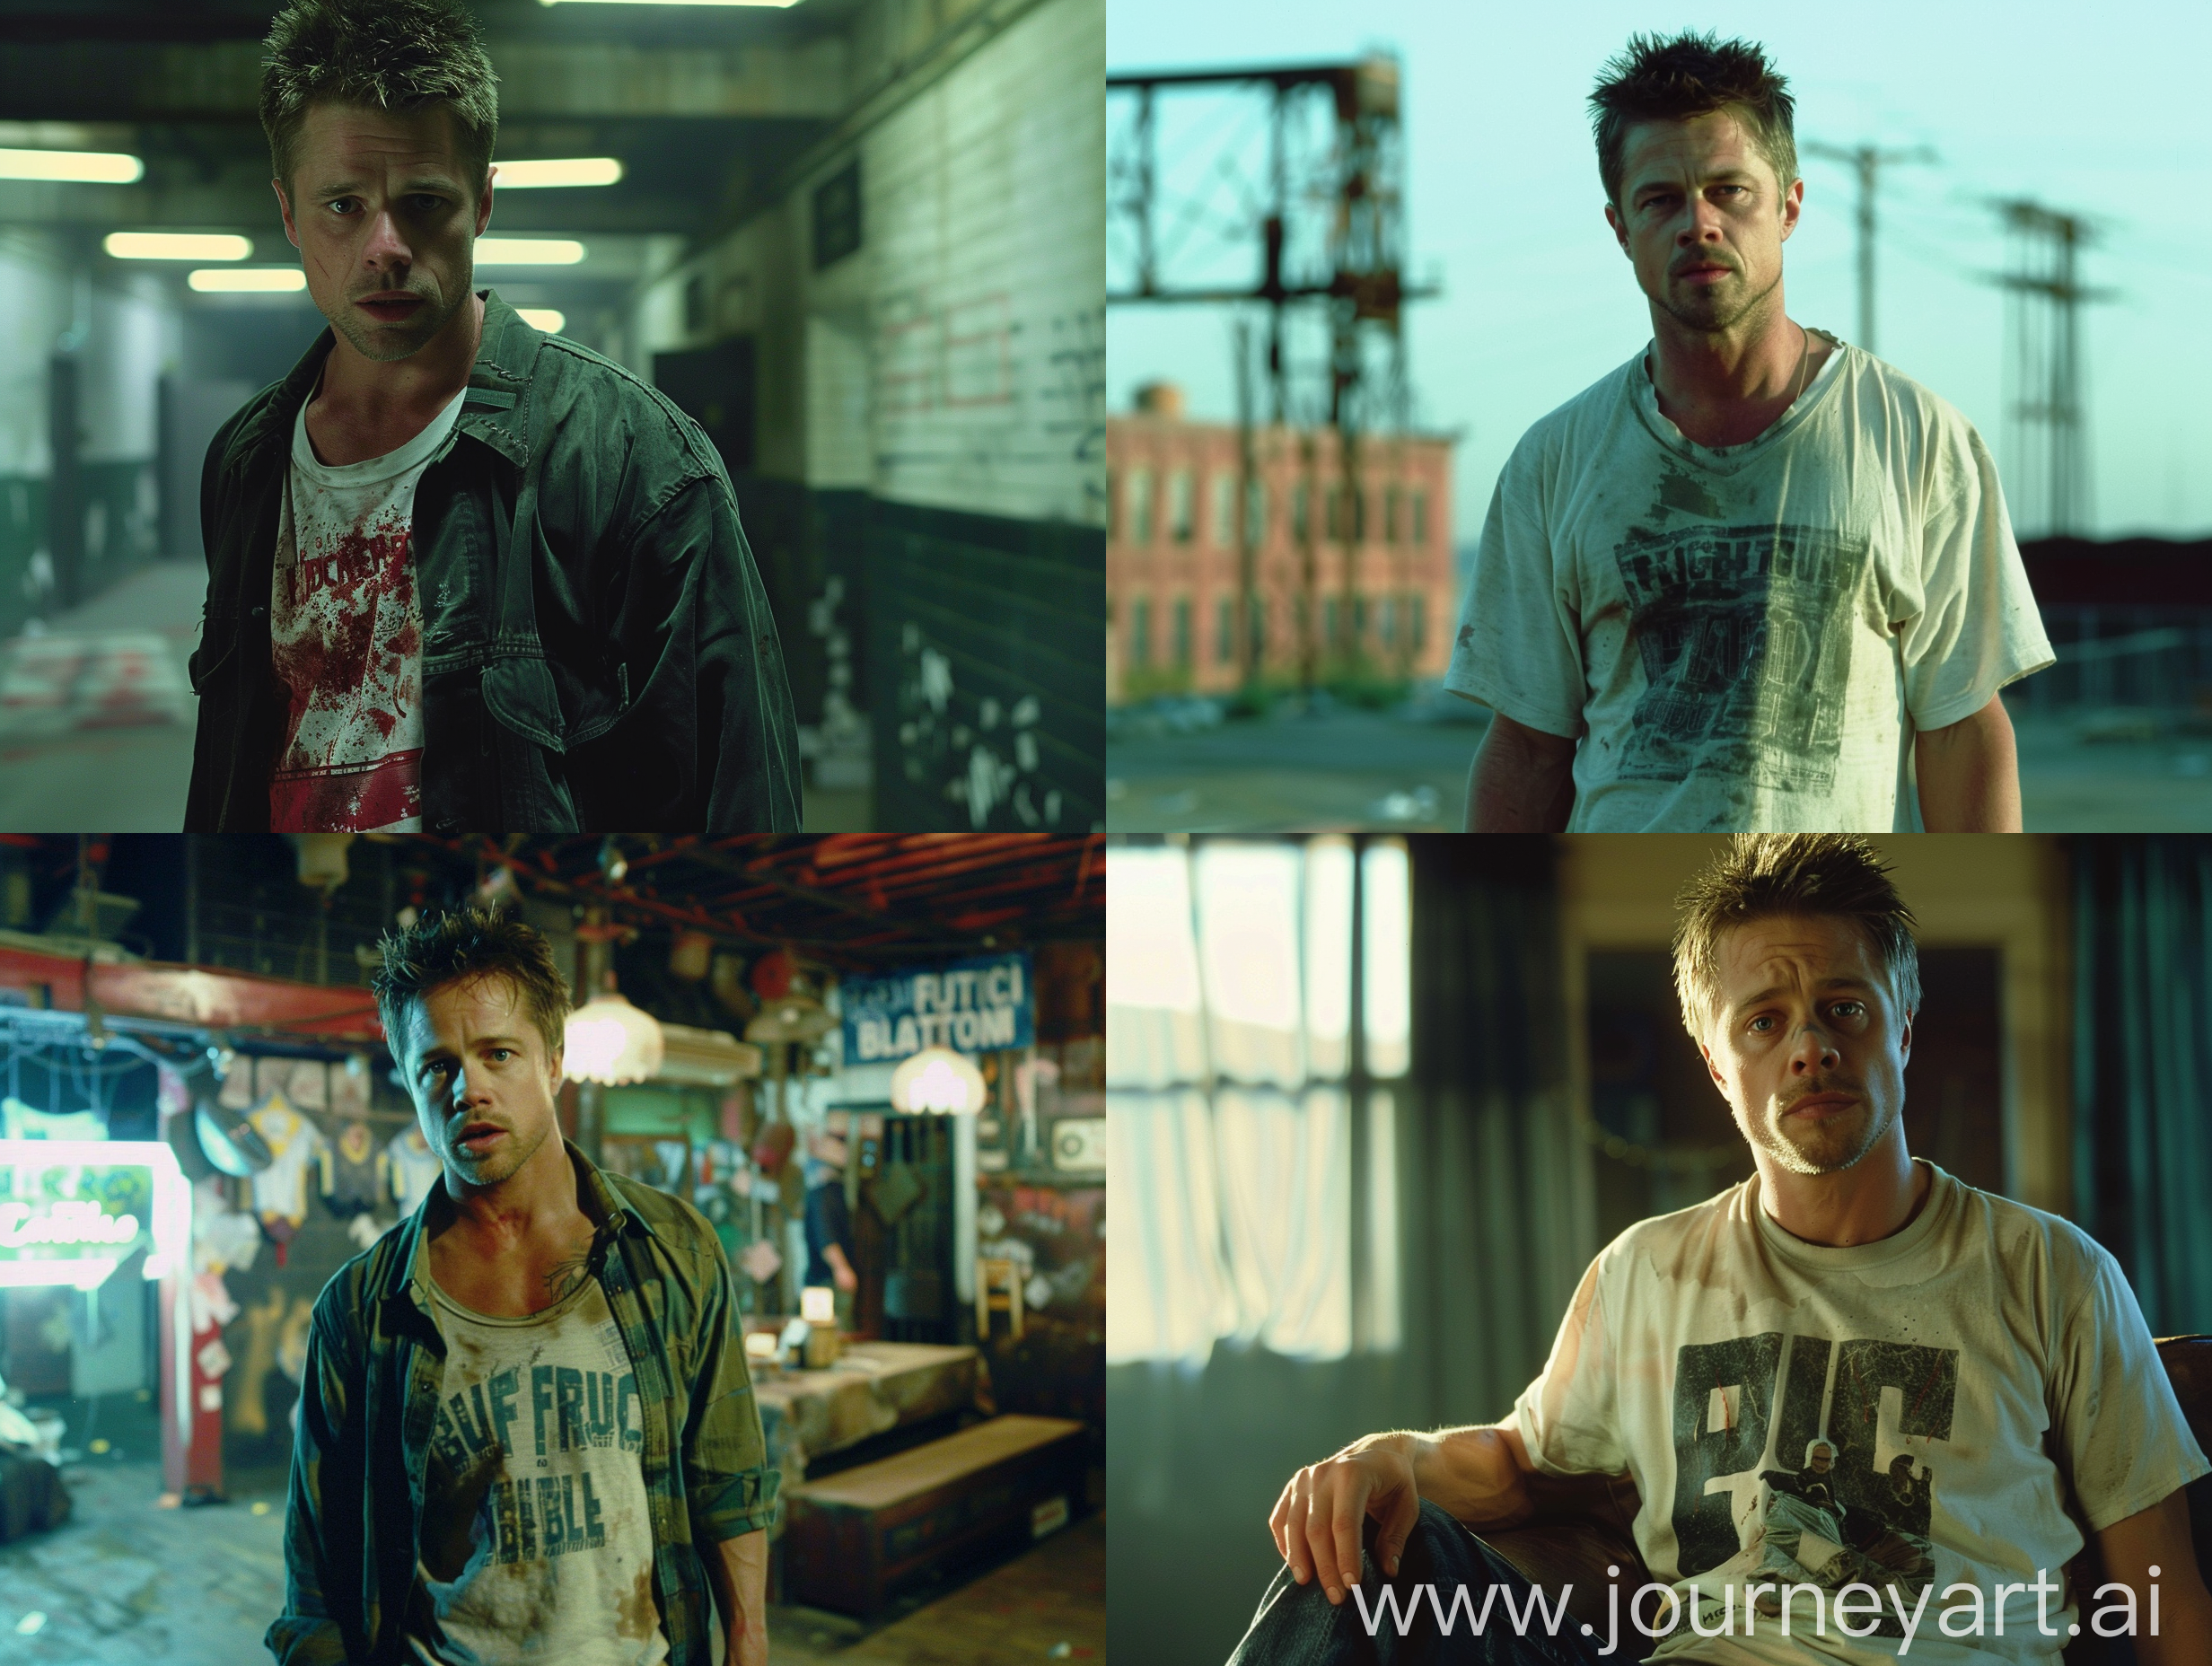 Make a picture of Brad Pitt wearing this shirt in the movie Fight Club